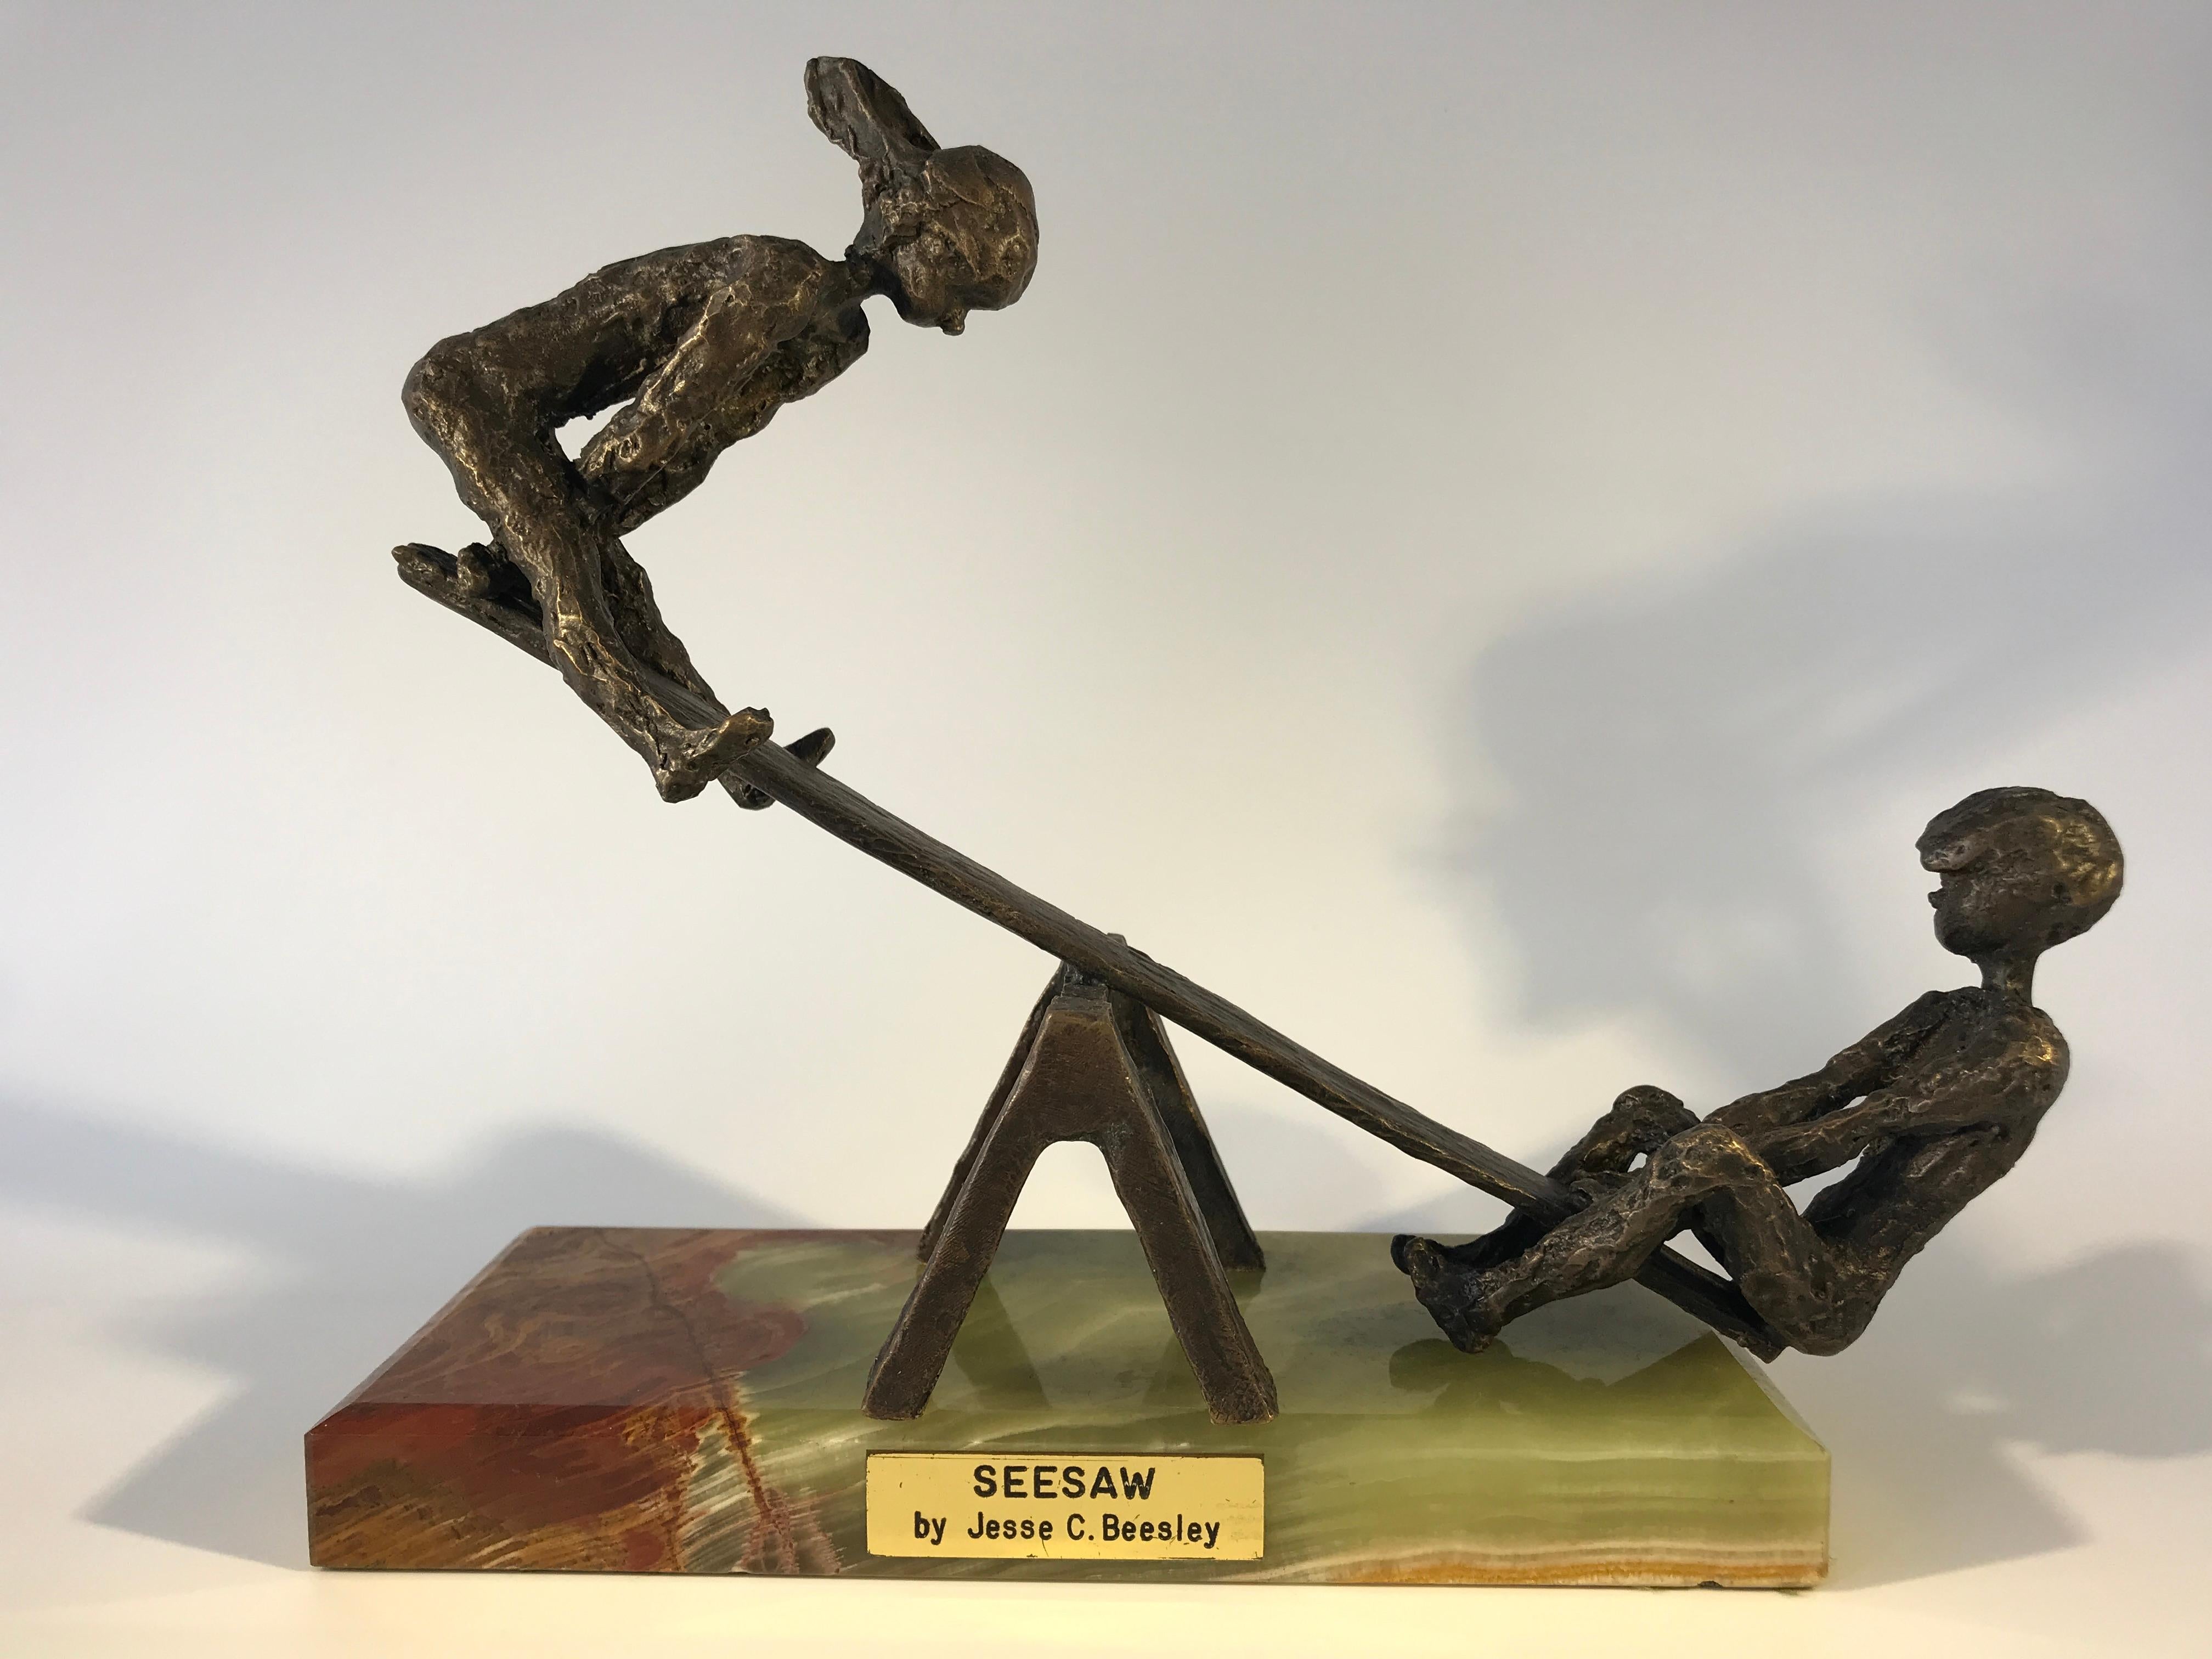 Bronze sculpture of young boy and girl on a SeeSaw by American sculptor Jesse C Beesley of Tennesee
Known for his bronze sculptures of children, his work is in private collections and also the Smithsonian Museum collection.
On titled plinth with